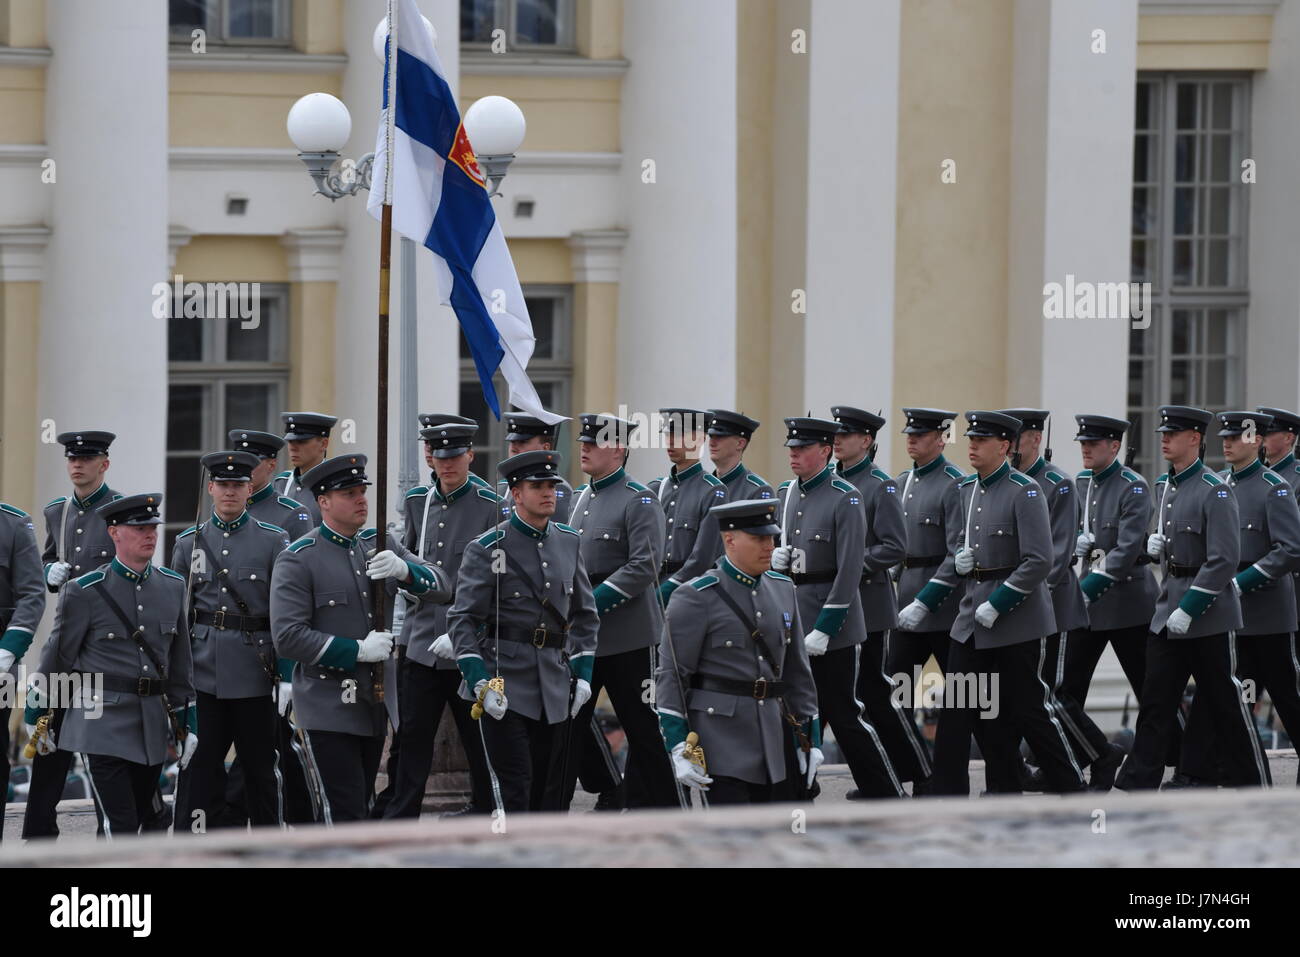 Helsinki, Finland. 25th May, 2017. The state funeral of the former President of the Republic of Finland Mauno Koivisto. Honor guard parading outside Helsinki Cathedral during funeral service of President Mauno Koivisto. Credit: Mikko Palonkorpi/Alamy Live News. Stock Photo